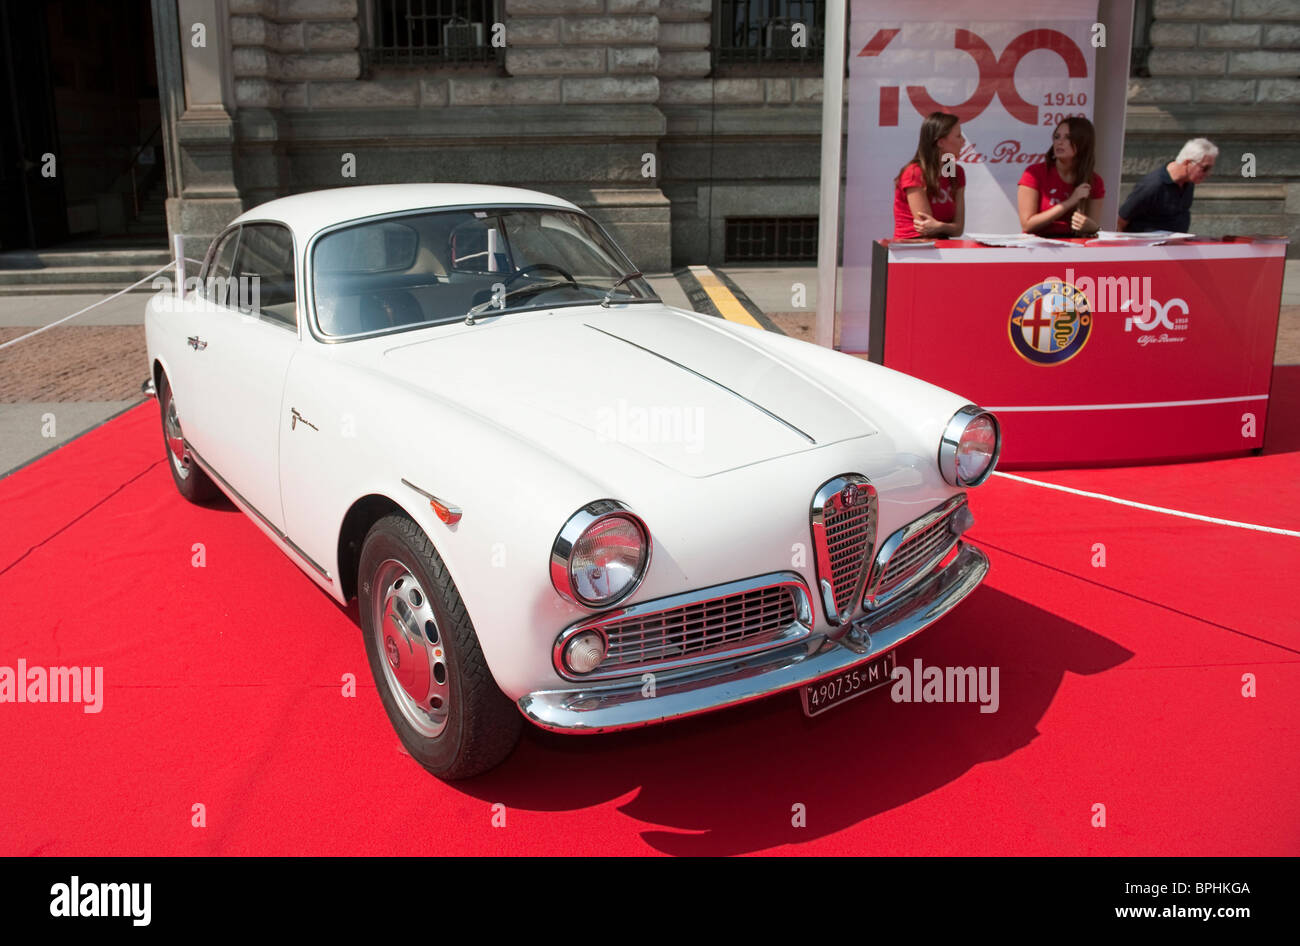 A Giulietta Sprint 1300cc 1959 on display in Milan, Italy during the celebrations for Alfa Romeo 100 years Stock Photo